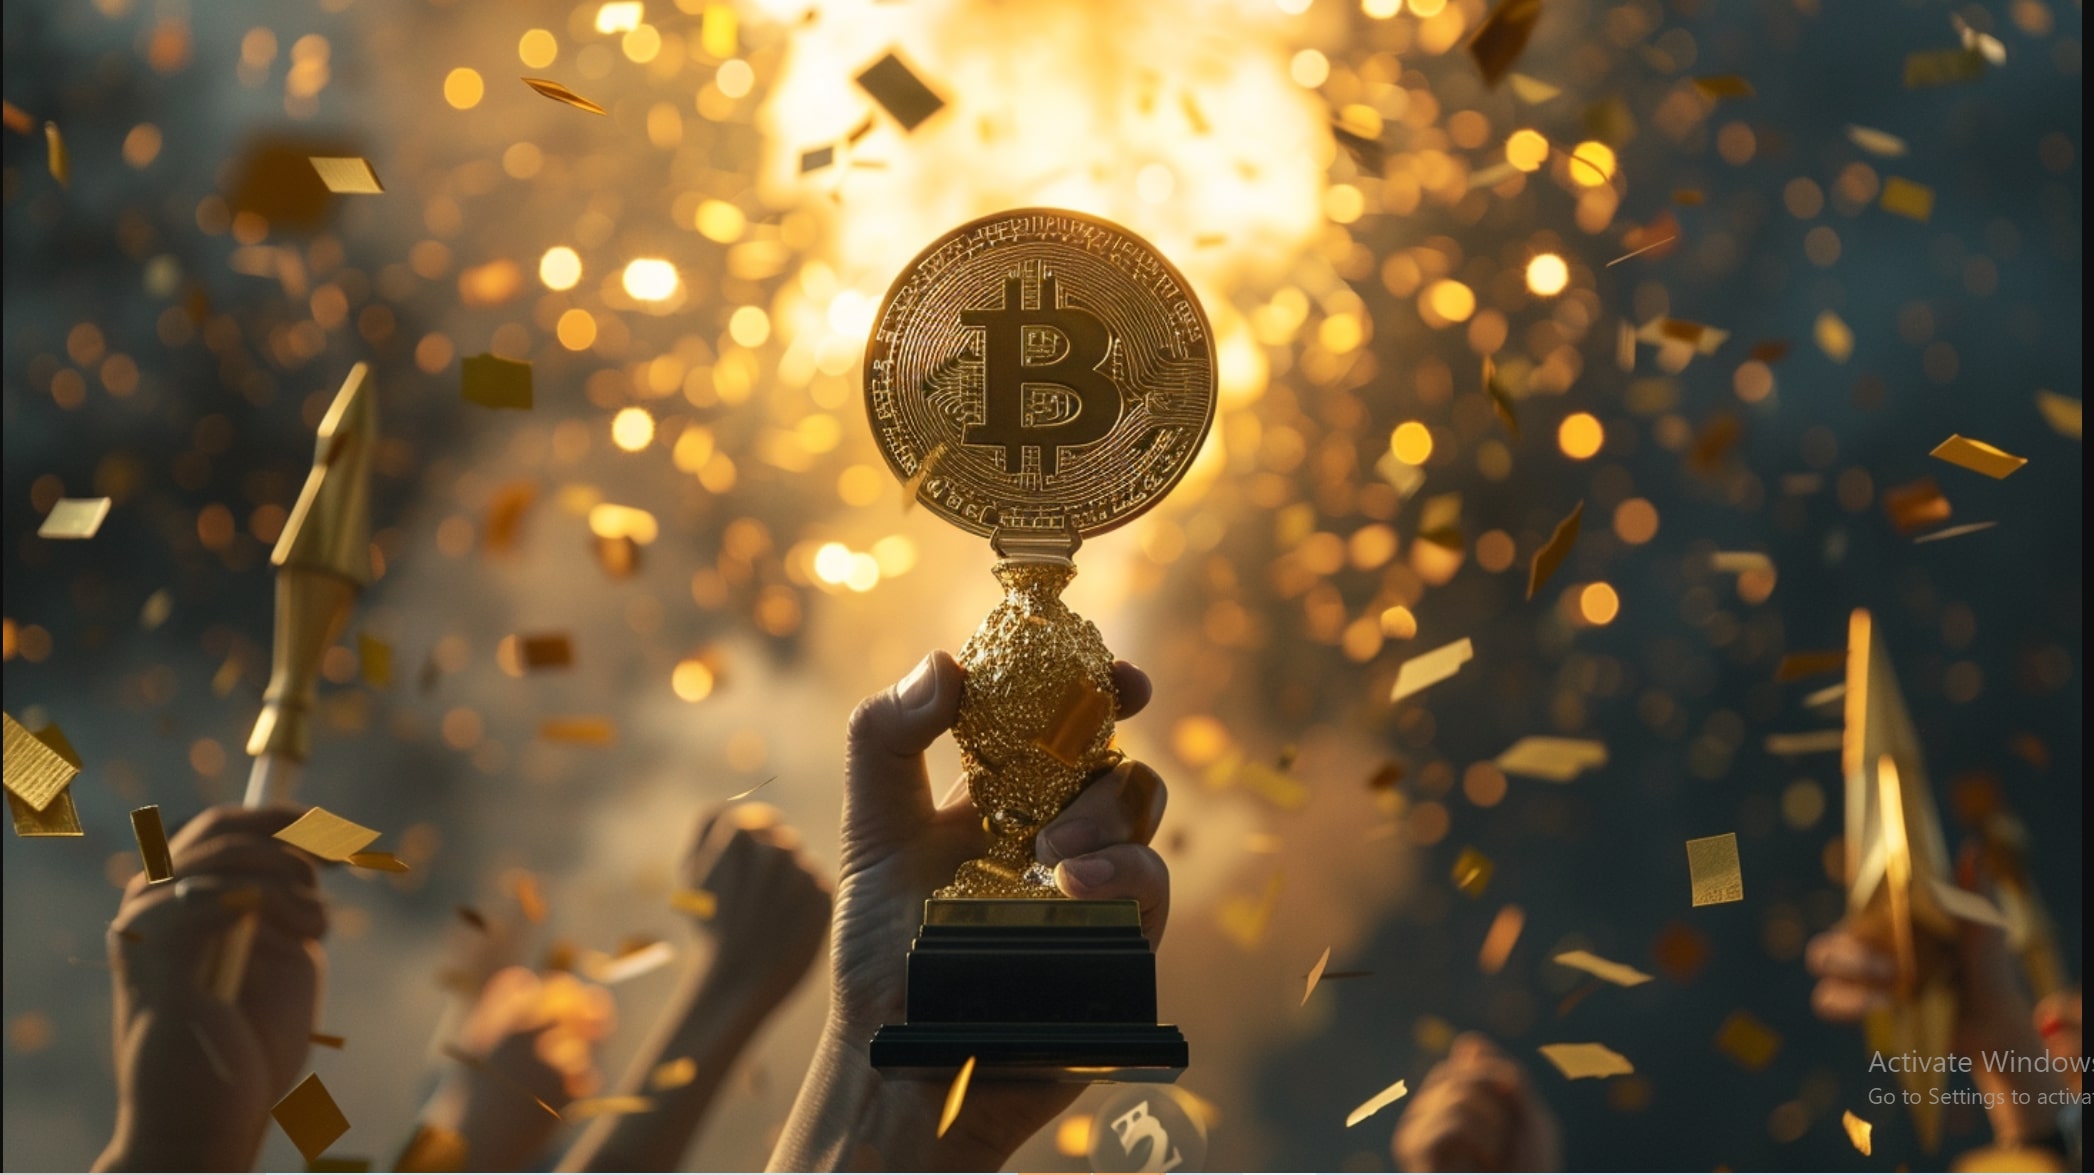 Bitcoin Price Prediction: BTC Briefly Hit $8,900 On BitMEX After User Sold 400 Bitcoin, But The Green BTC Presale Rockets Towards $6.5M